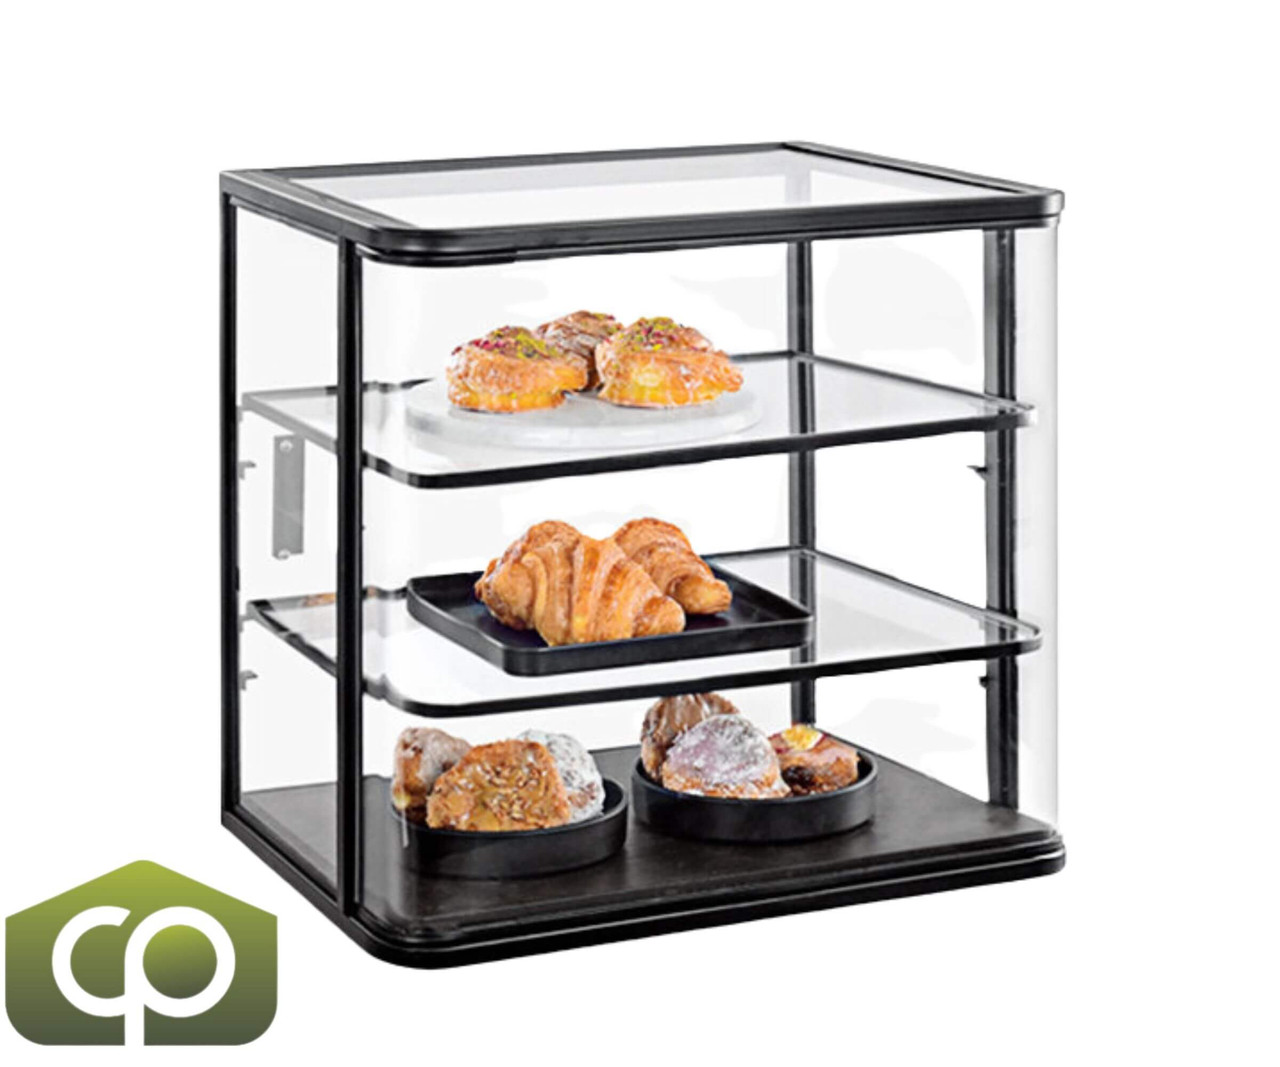 Cal-Mil Elegant Curved 21" x 17" x 23 1/4" Heritage 3-Tier Bakery Display Case-Chicken Pieces